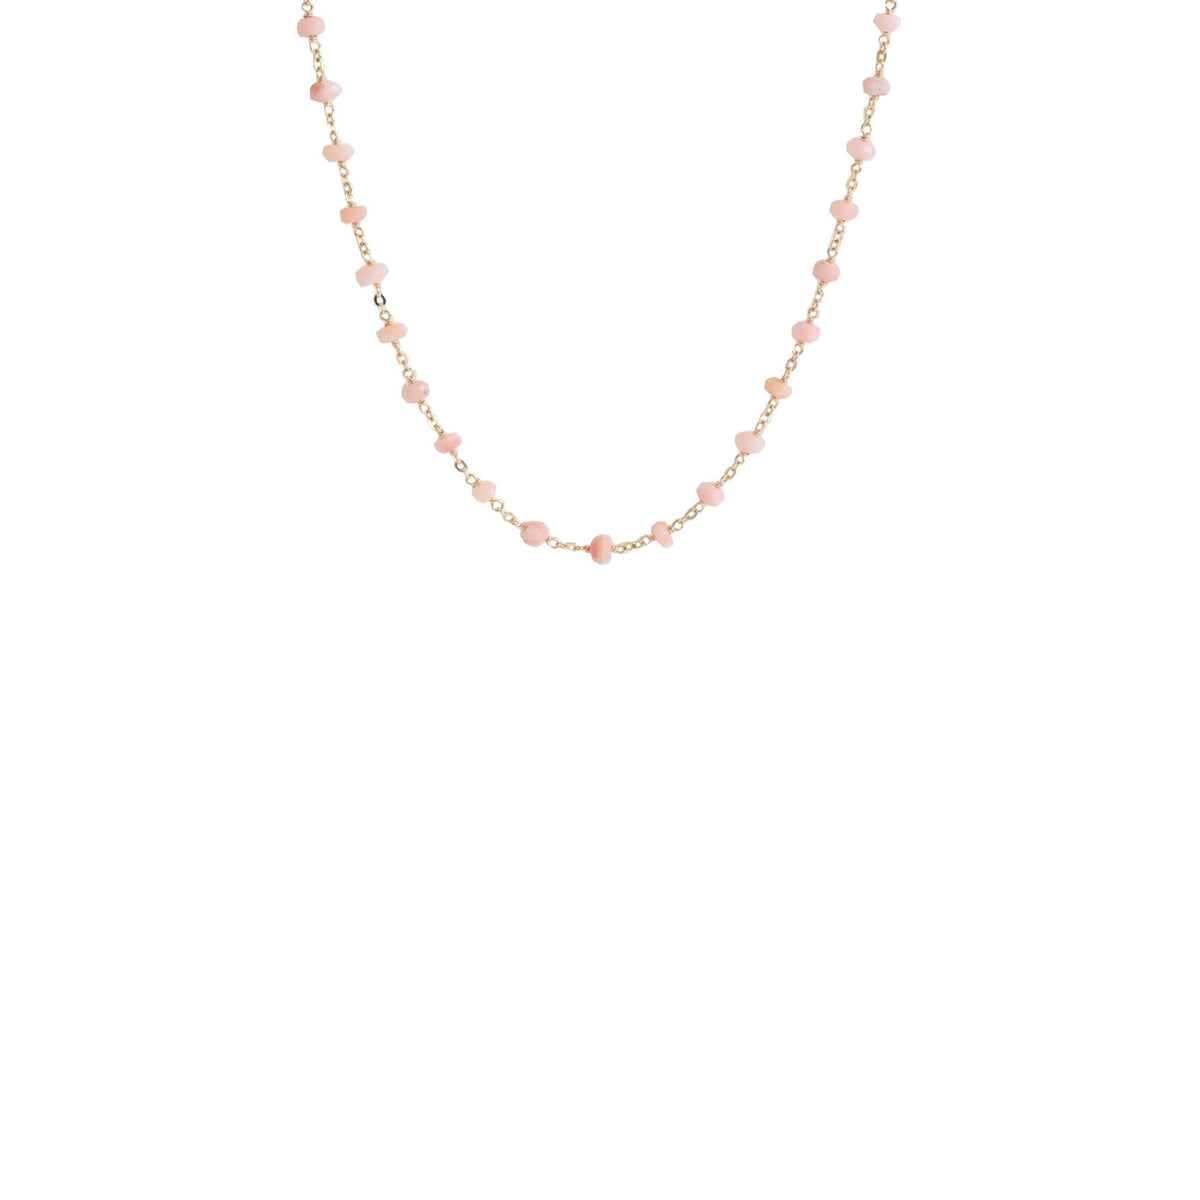 ICONIC SHORT BEADED NECKLACE - PINK OPAL &amp; GOLD 16-20&quot; - SO PRETTY CARA COTTER